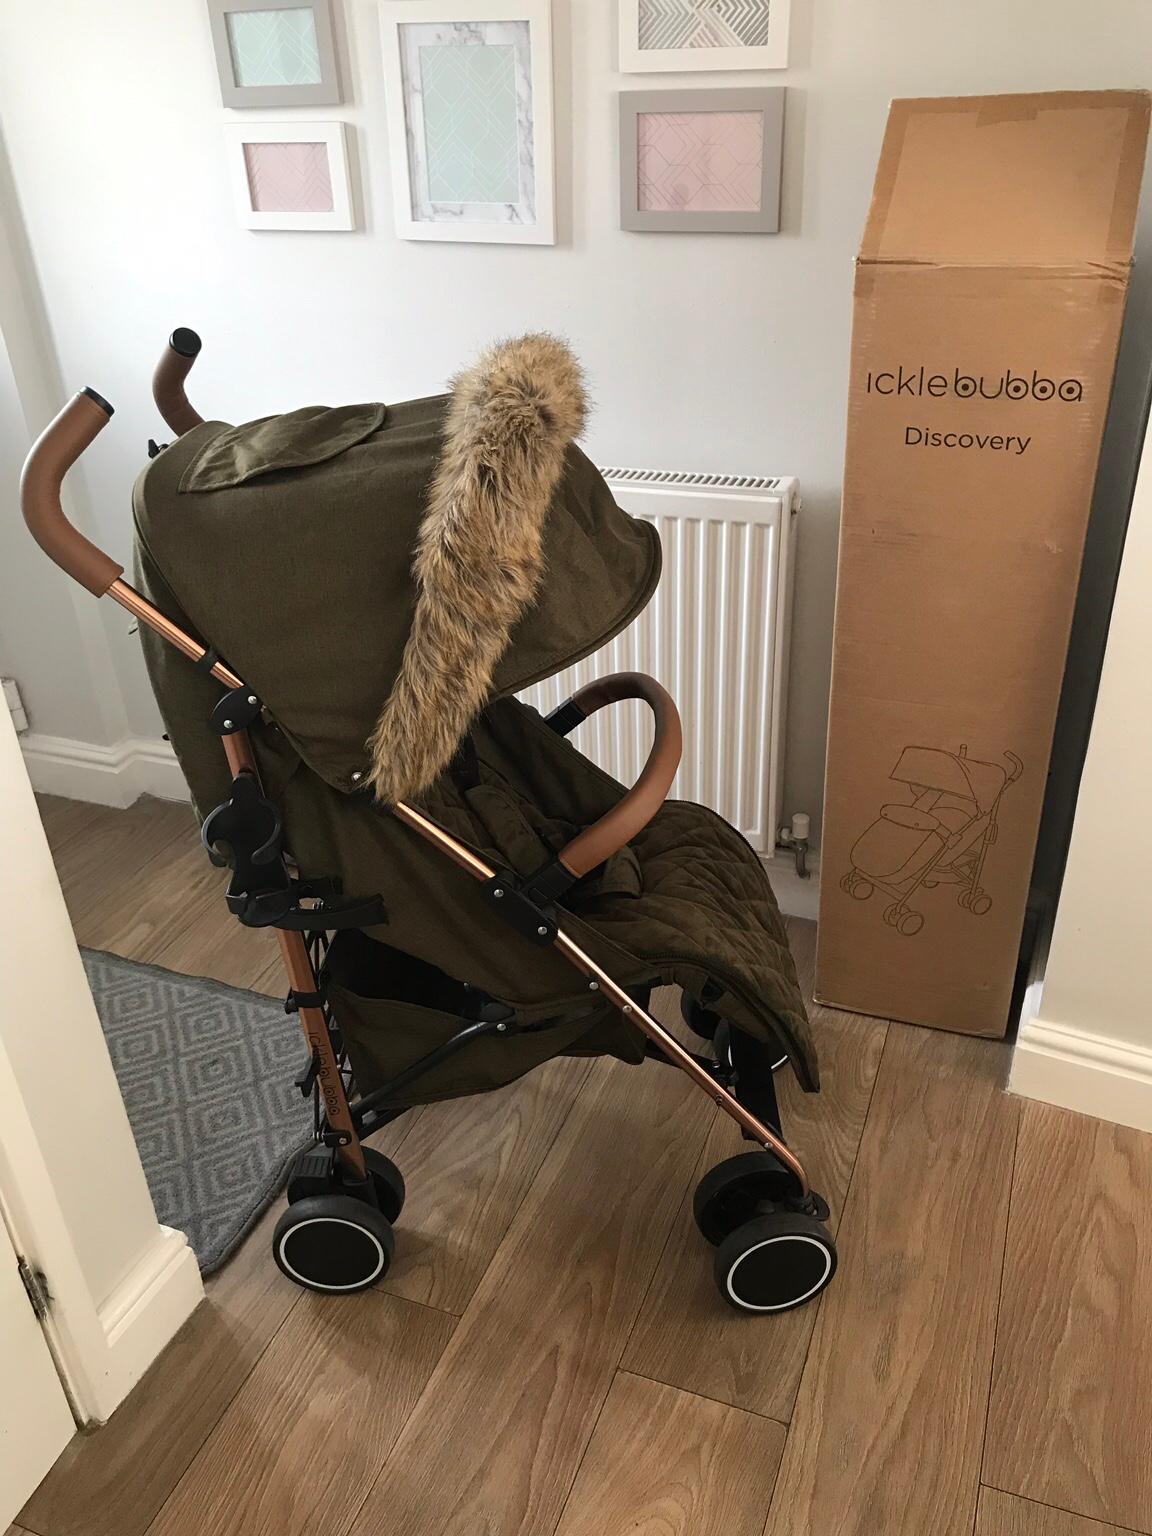 ickle bubba discovery khaki